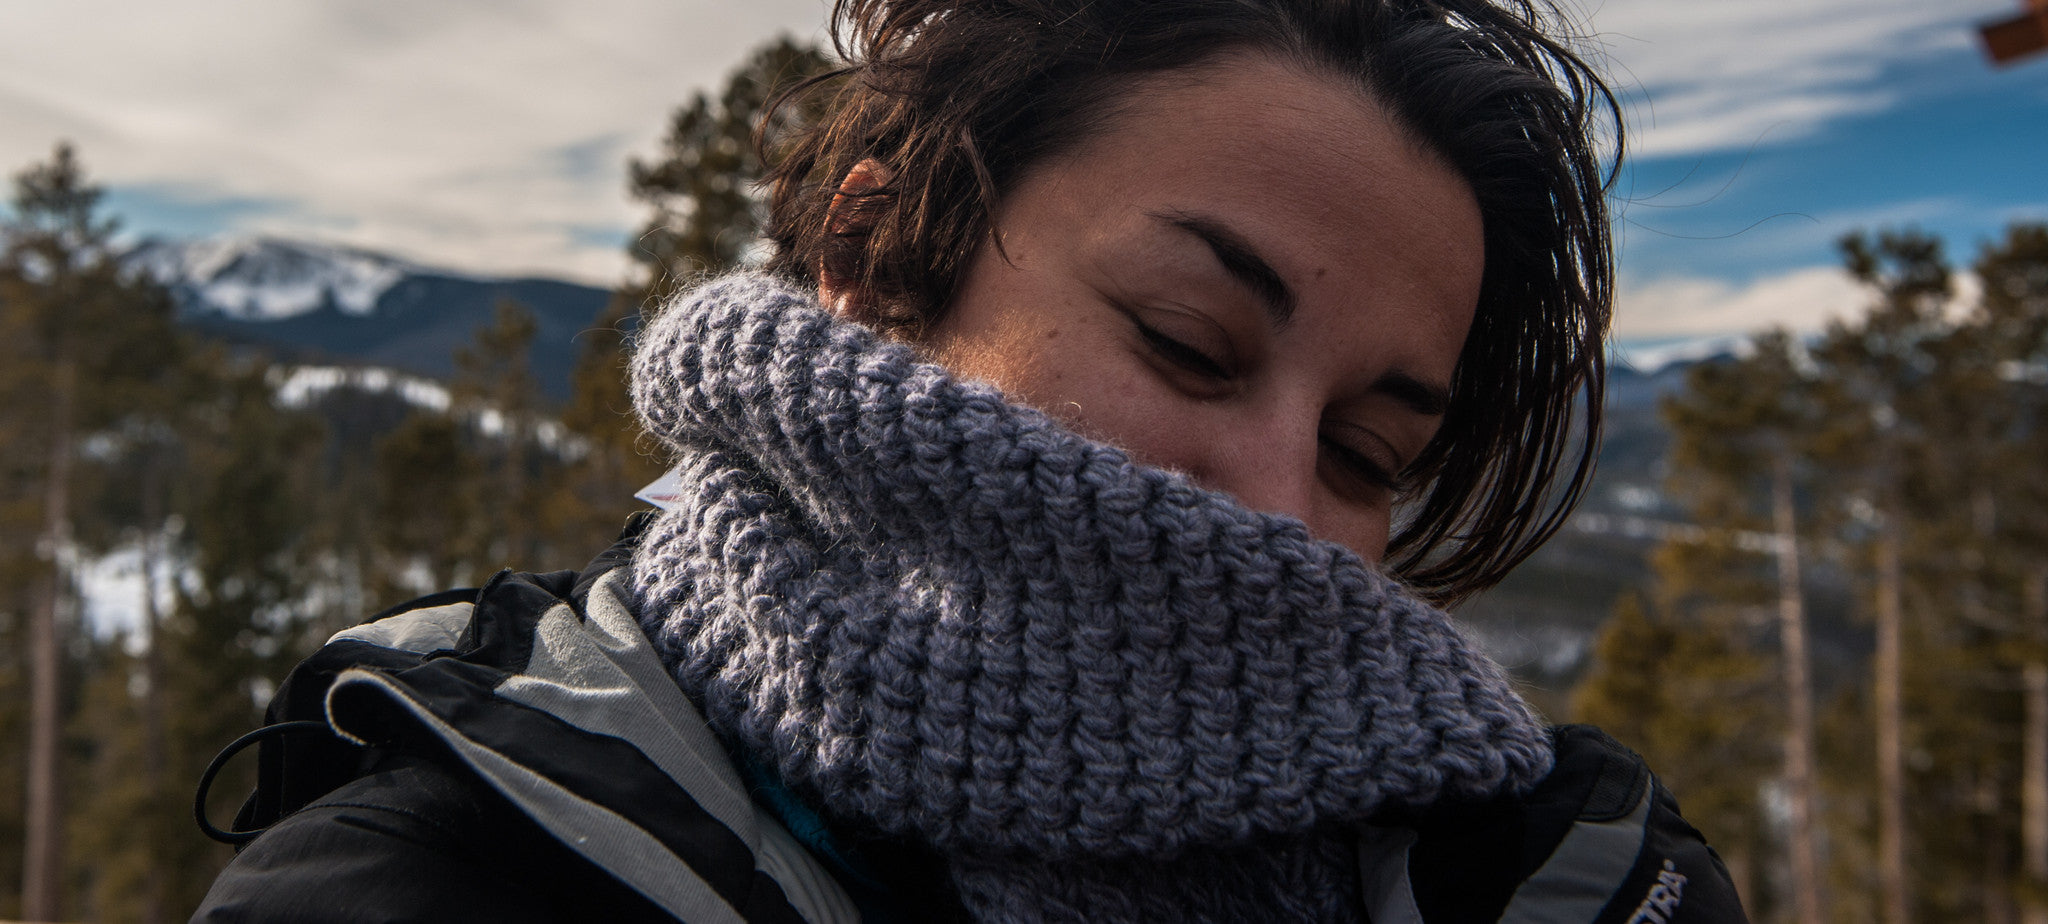 The Dan Infinity Scarf For Her